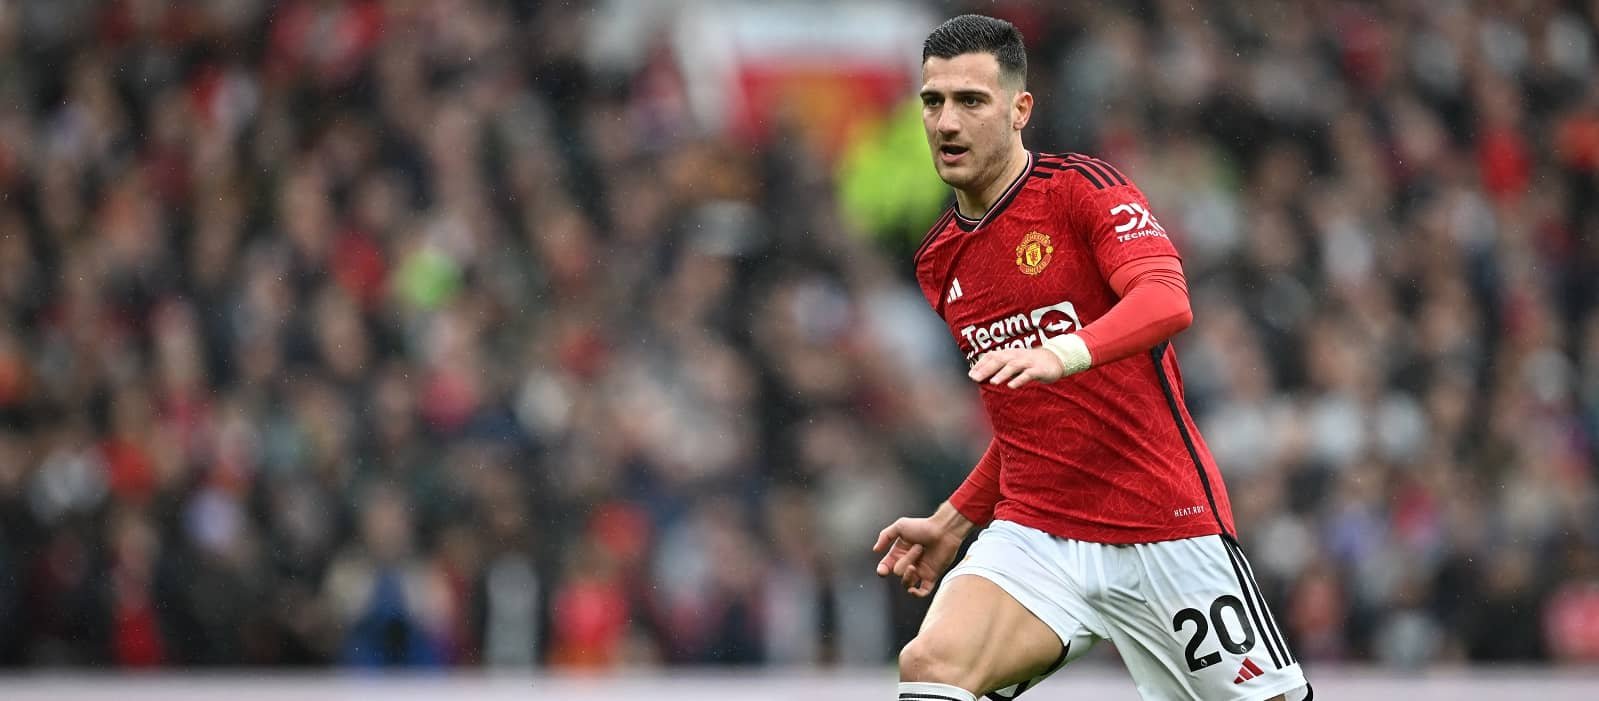 Diogo Dalot bounces back with strong performance vs Liverpool after Chelsea disappointment – Man United News And Transfer News